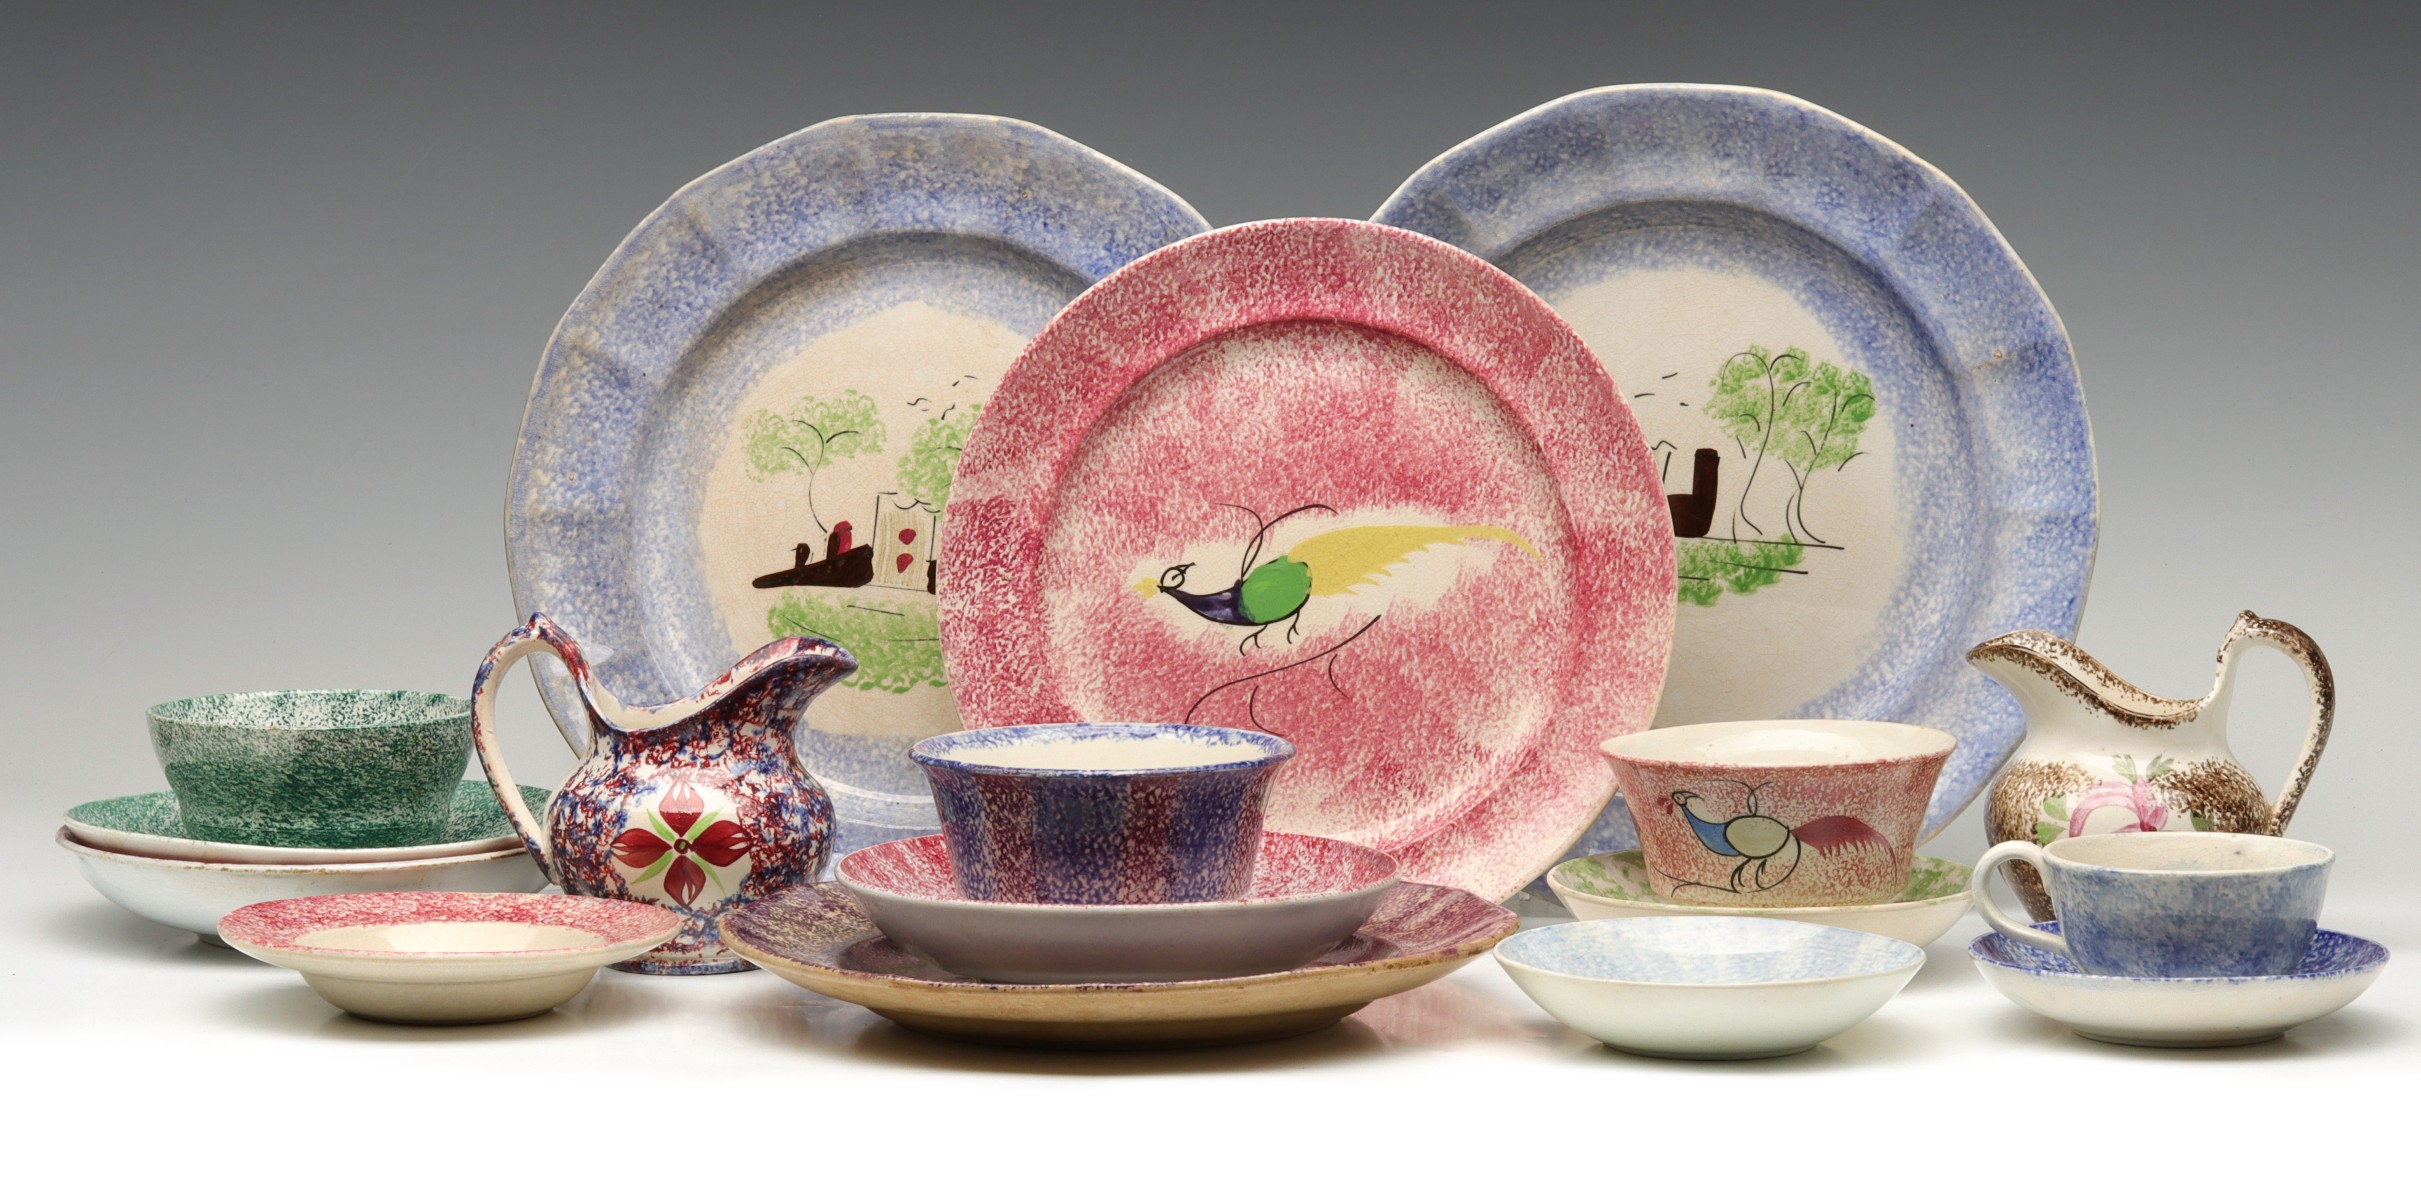 A VARIED COLLECTION OF 19TH C. SPATTERWARE